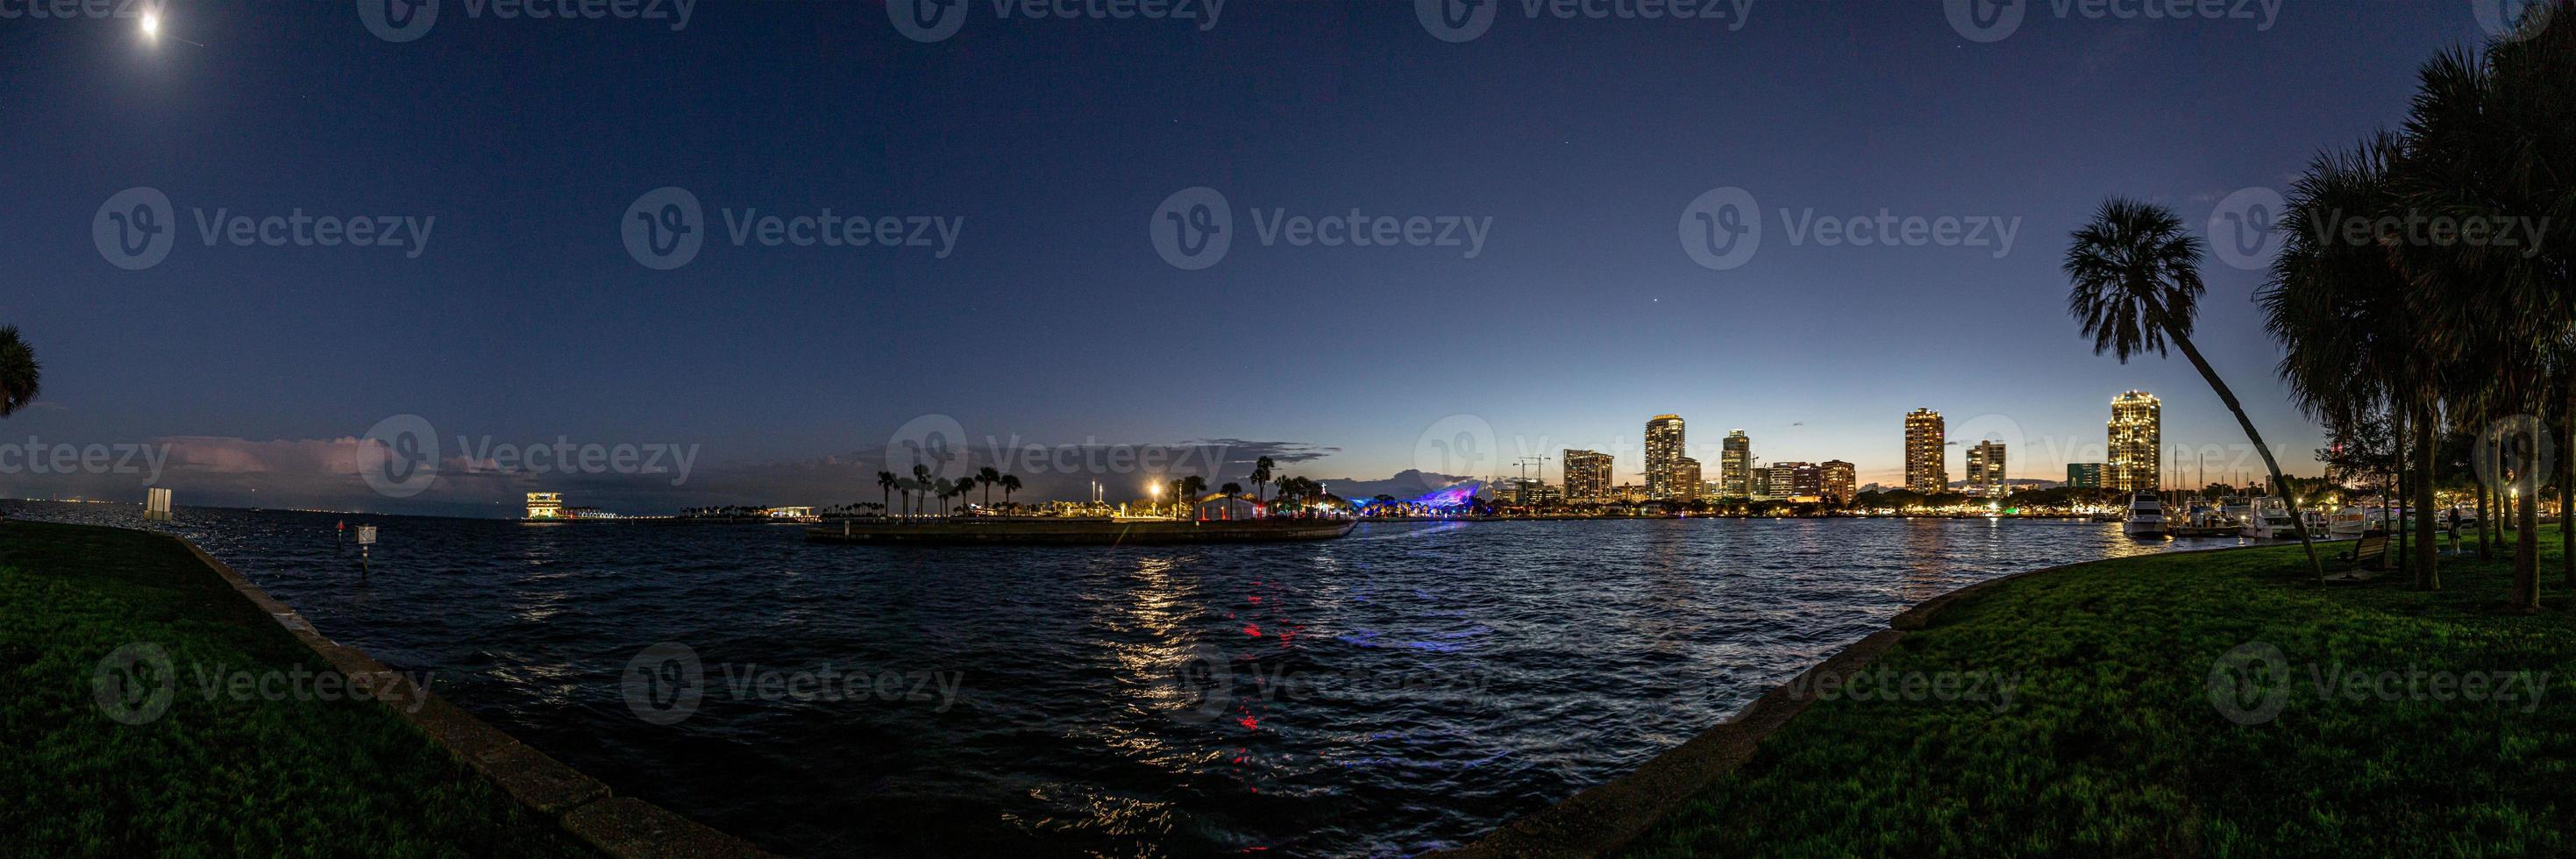 Panoramic image of St. Petersburg harbor in Florida in the evening photo